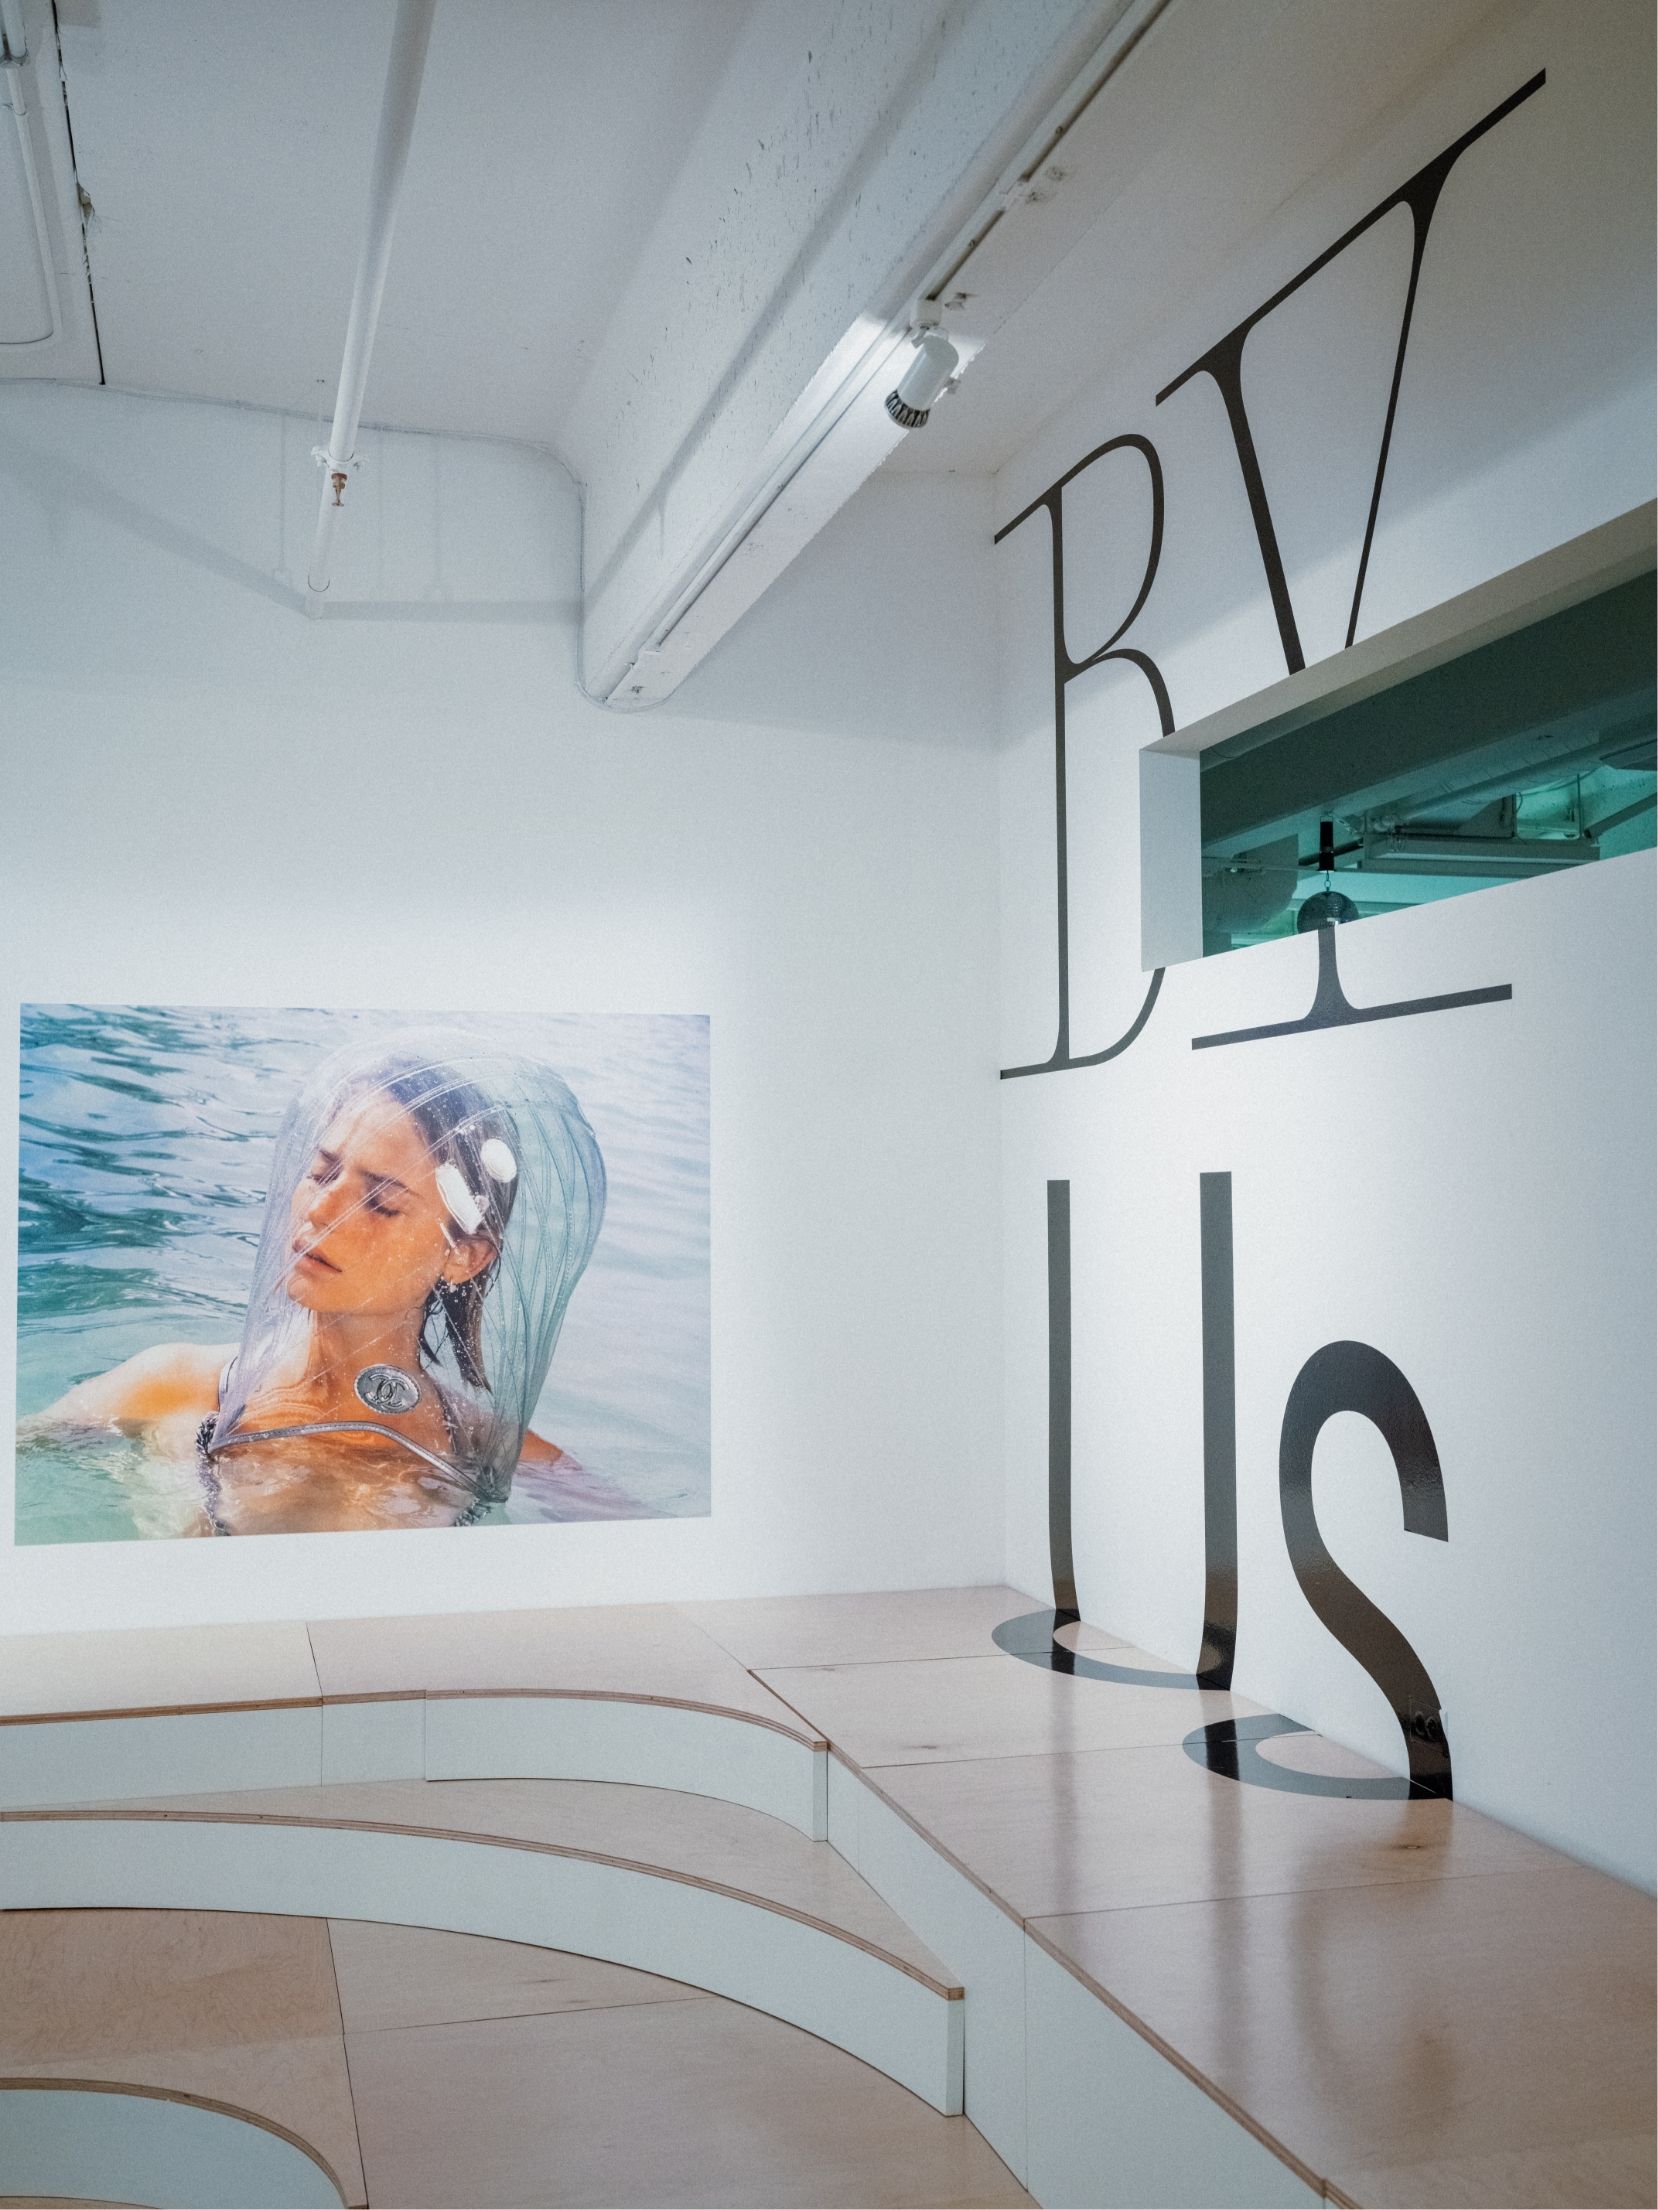 Rear corner of gallery showing stadium seating, video still print of woman floating in water with head in clear covering. Words By Us in vinyl on wall